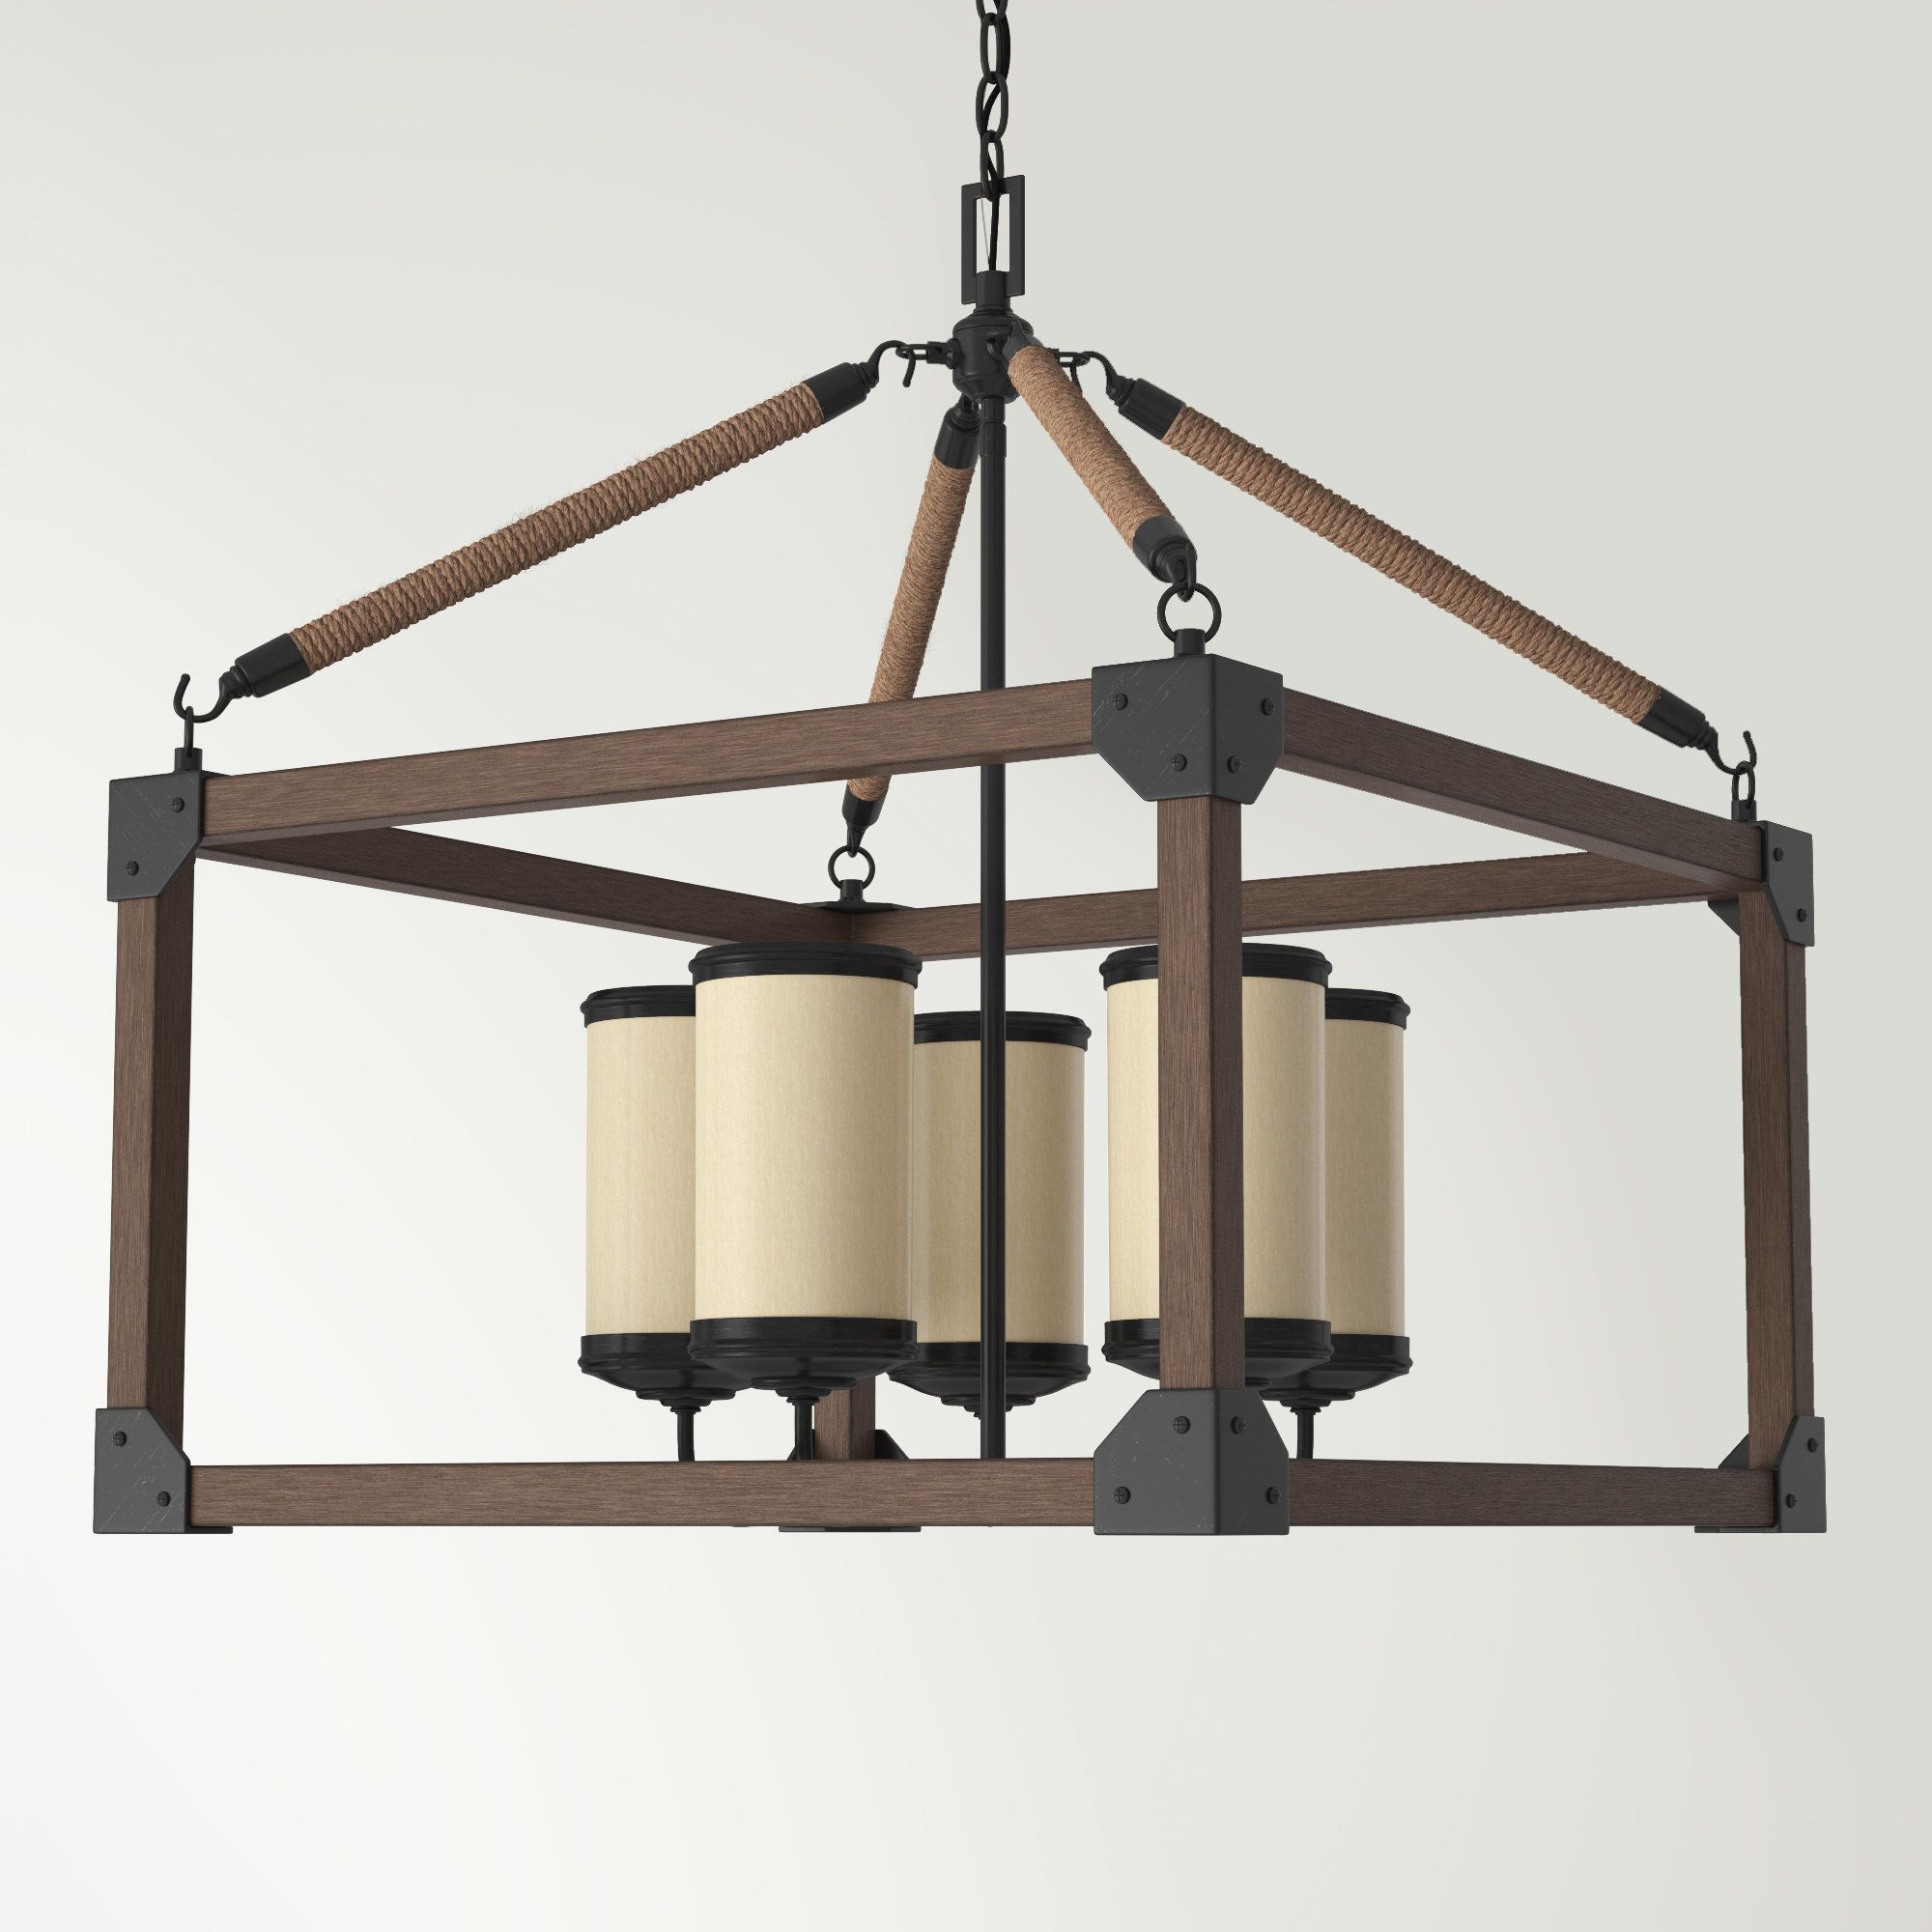 Preferred Five Light Lantern Chandeliers Throughout Three Posts™ Curtiss 5 – Light Lantern Rectangle Chandelier With Rope  Accents & Reviews (View 7 of 15)